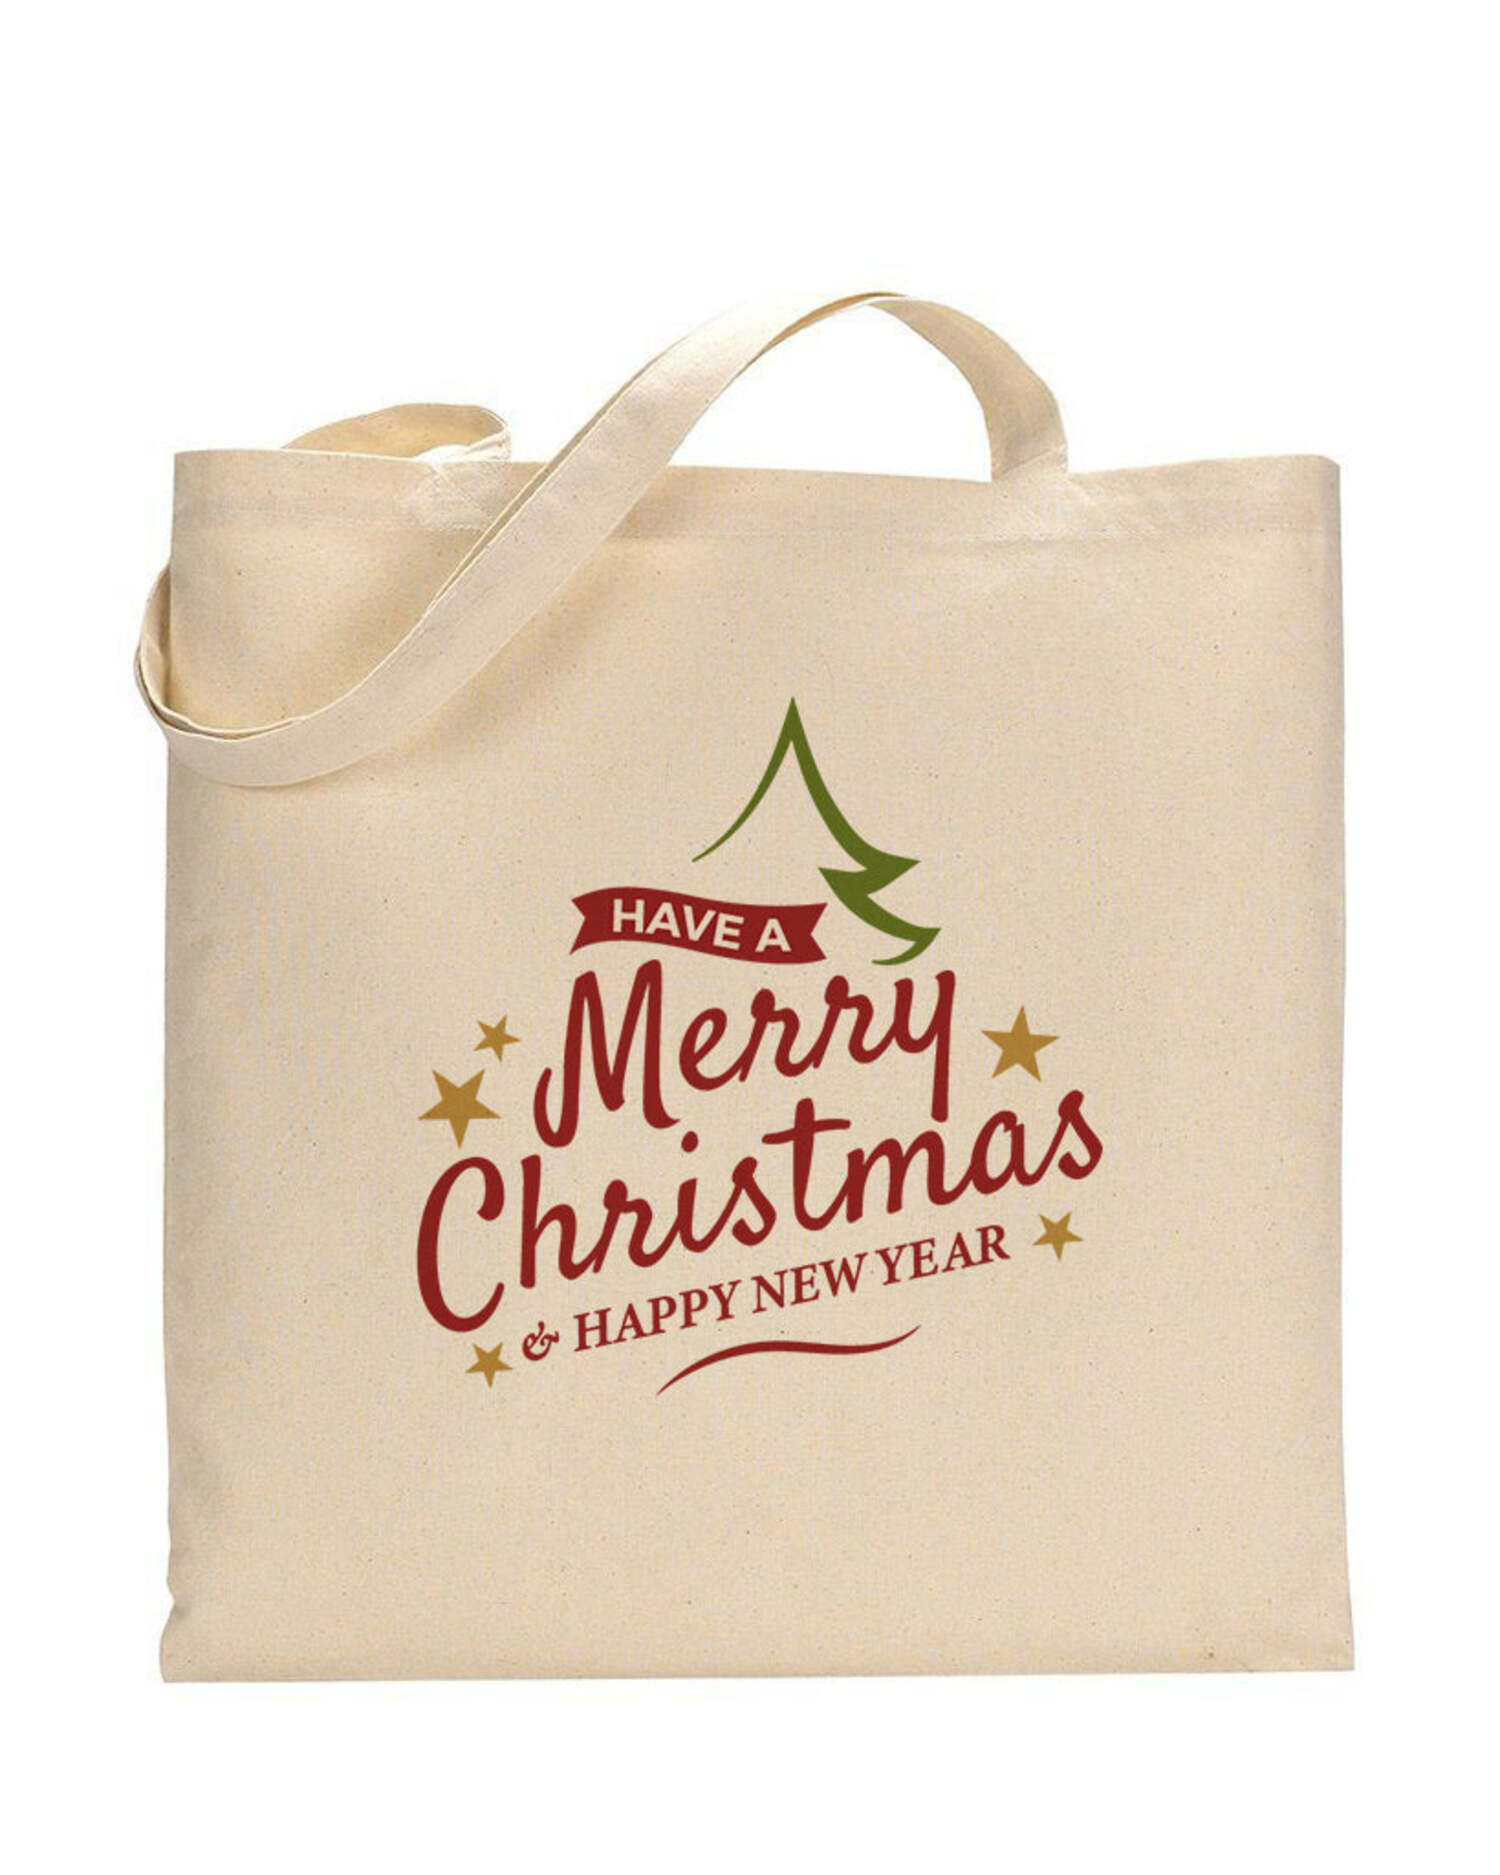 Customize Your Canvas Tote Bag for New Year Celebrations